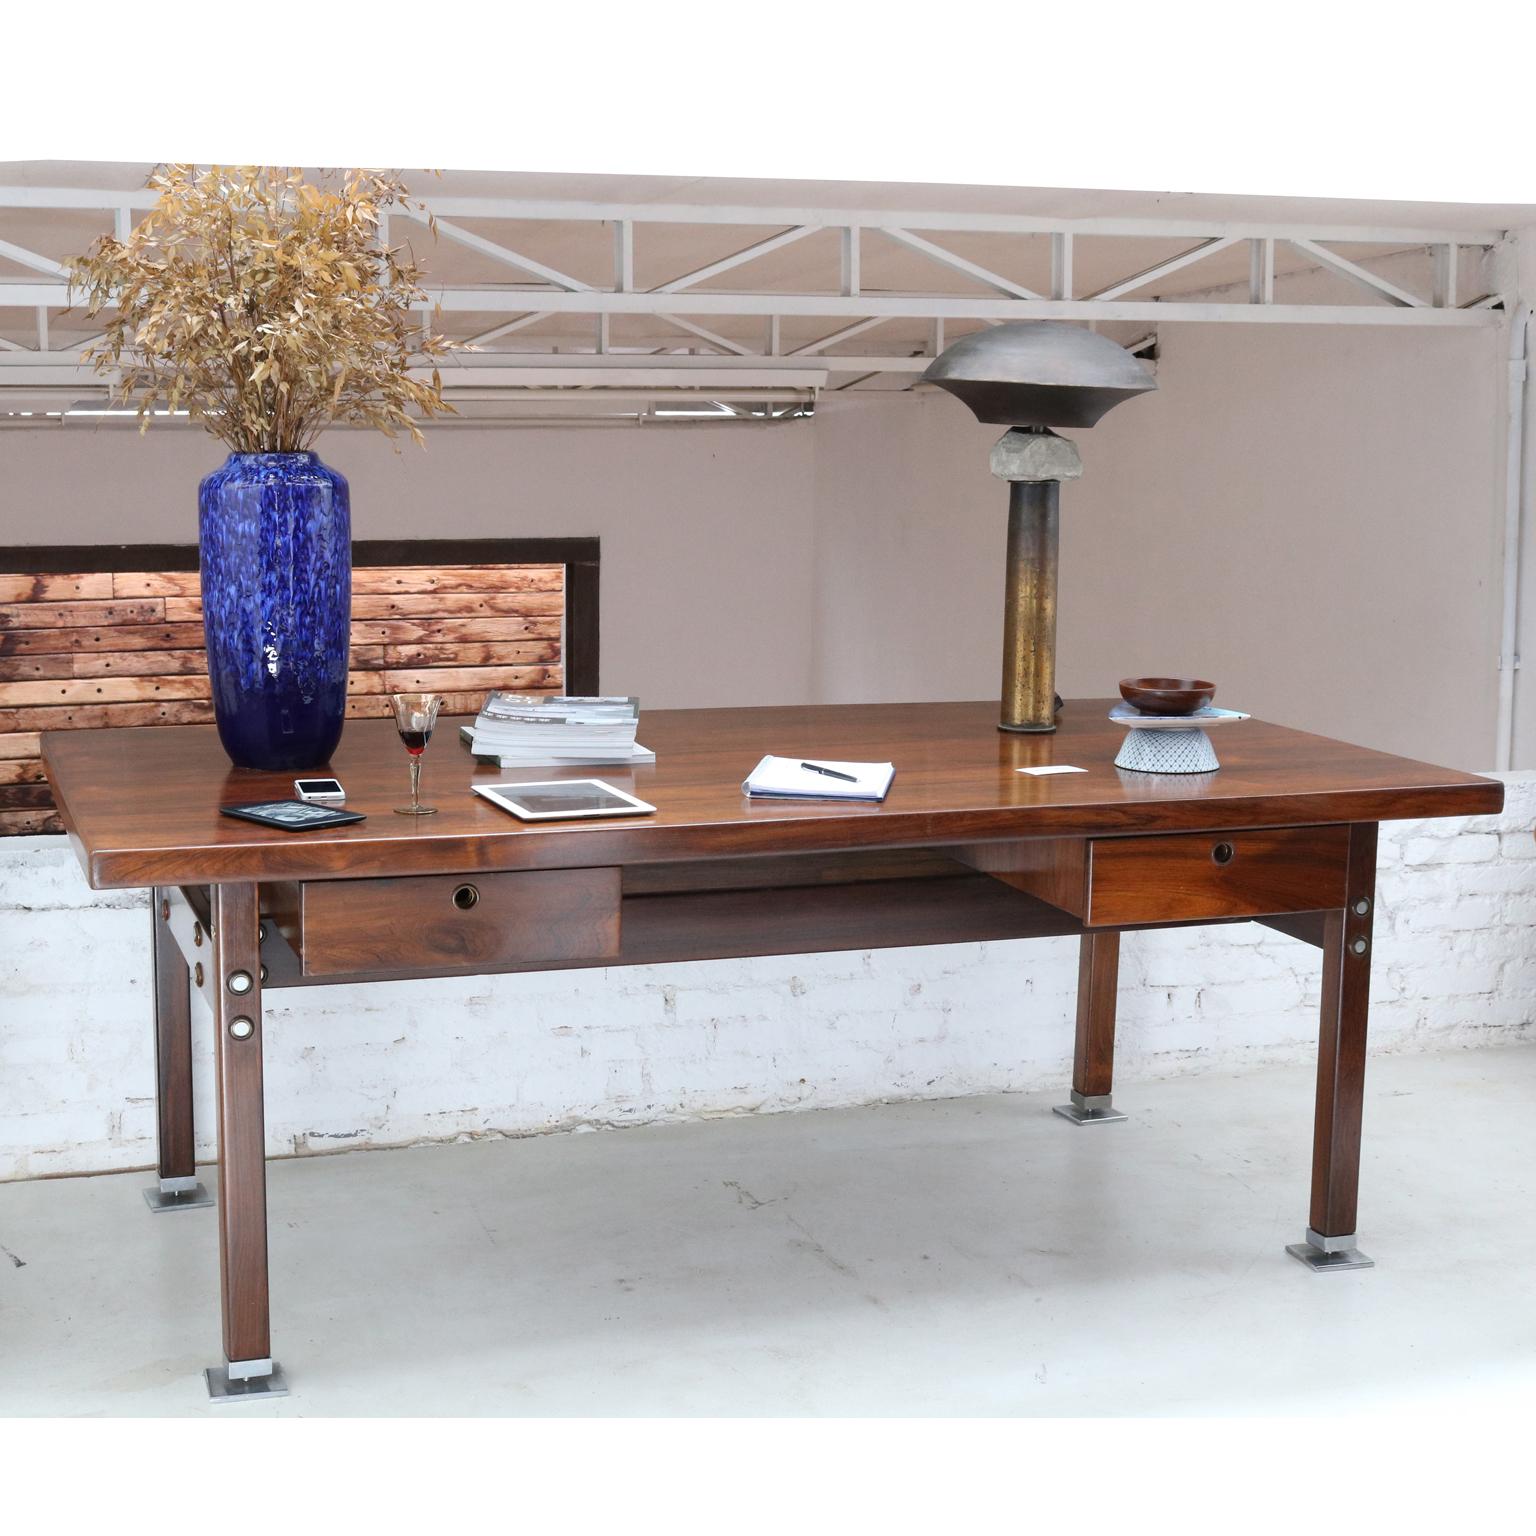 Brazilian midcentury desk table designed by Sergio Rodrigues, 1960s.
Materials: jacaranda wood and chromed metal.
Structure in solid hardwood, plywood covered in jacaranda wood and chrome plated brass trim. Created for the government ministries in